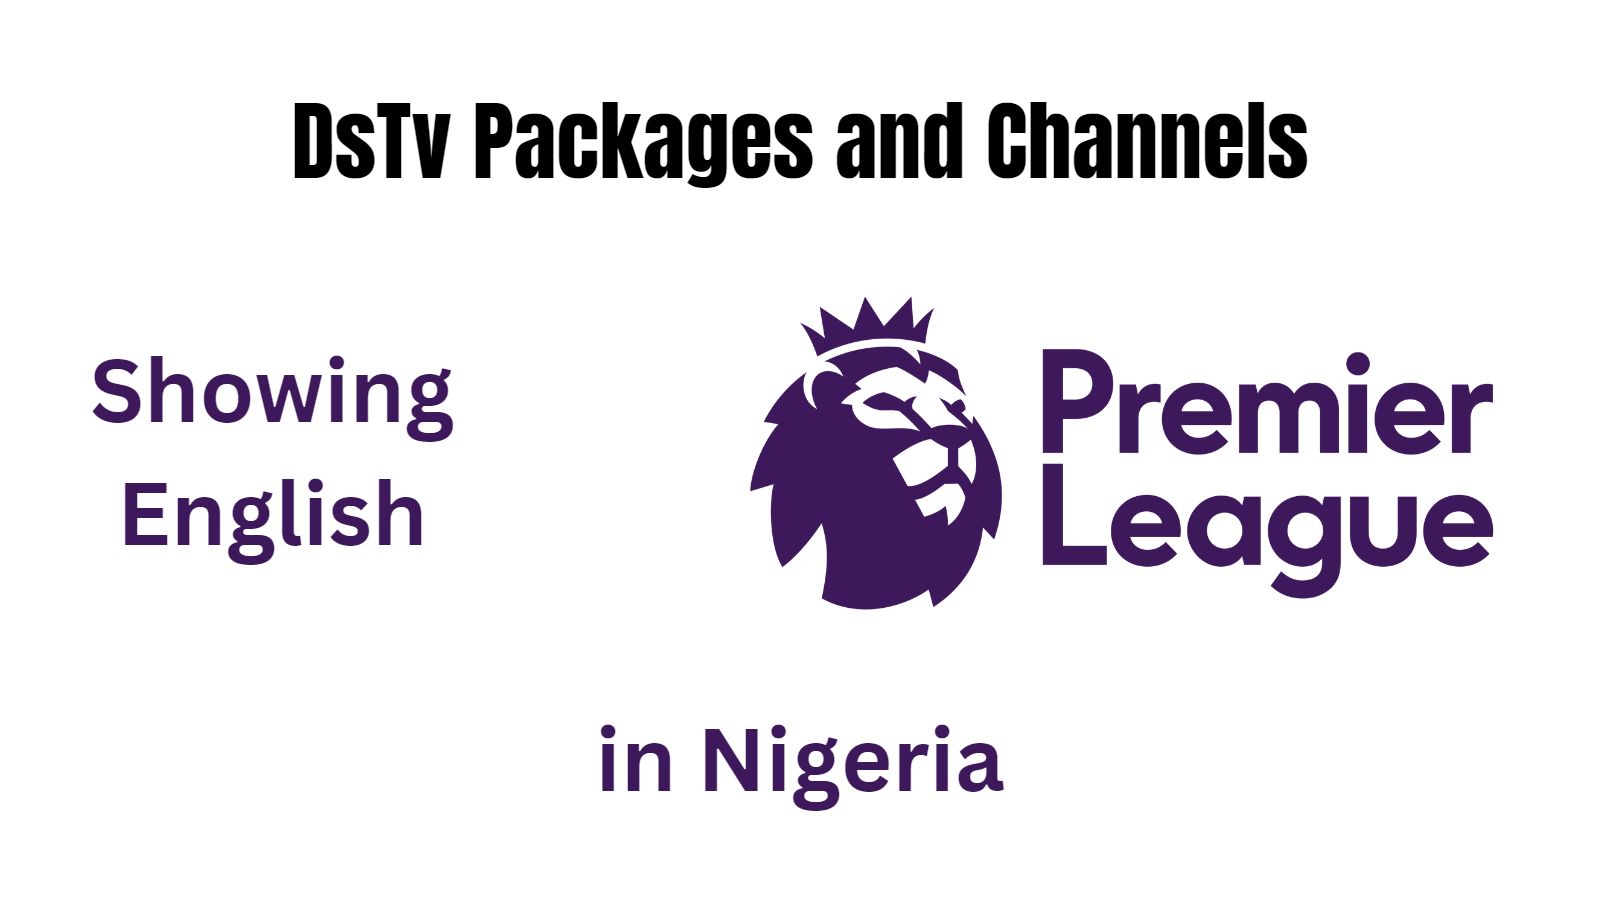 DsTv Packages and Channels showing English Premier League in Nigeria